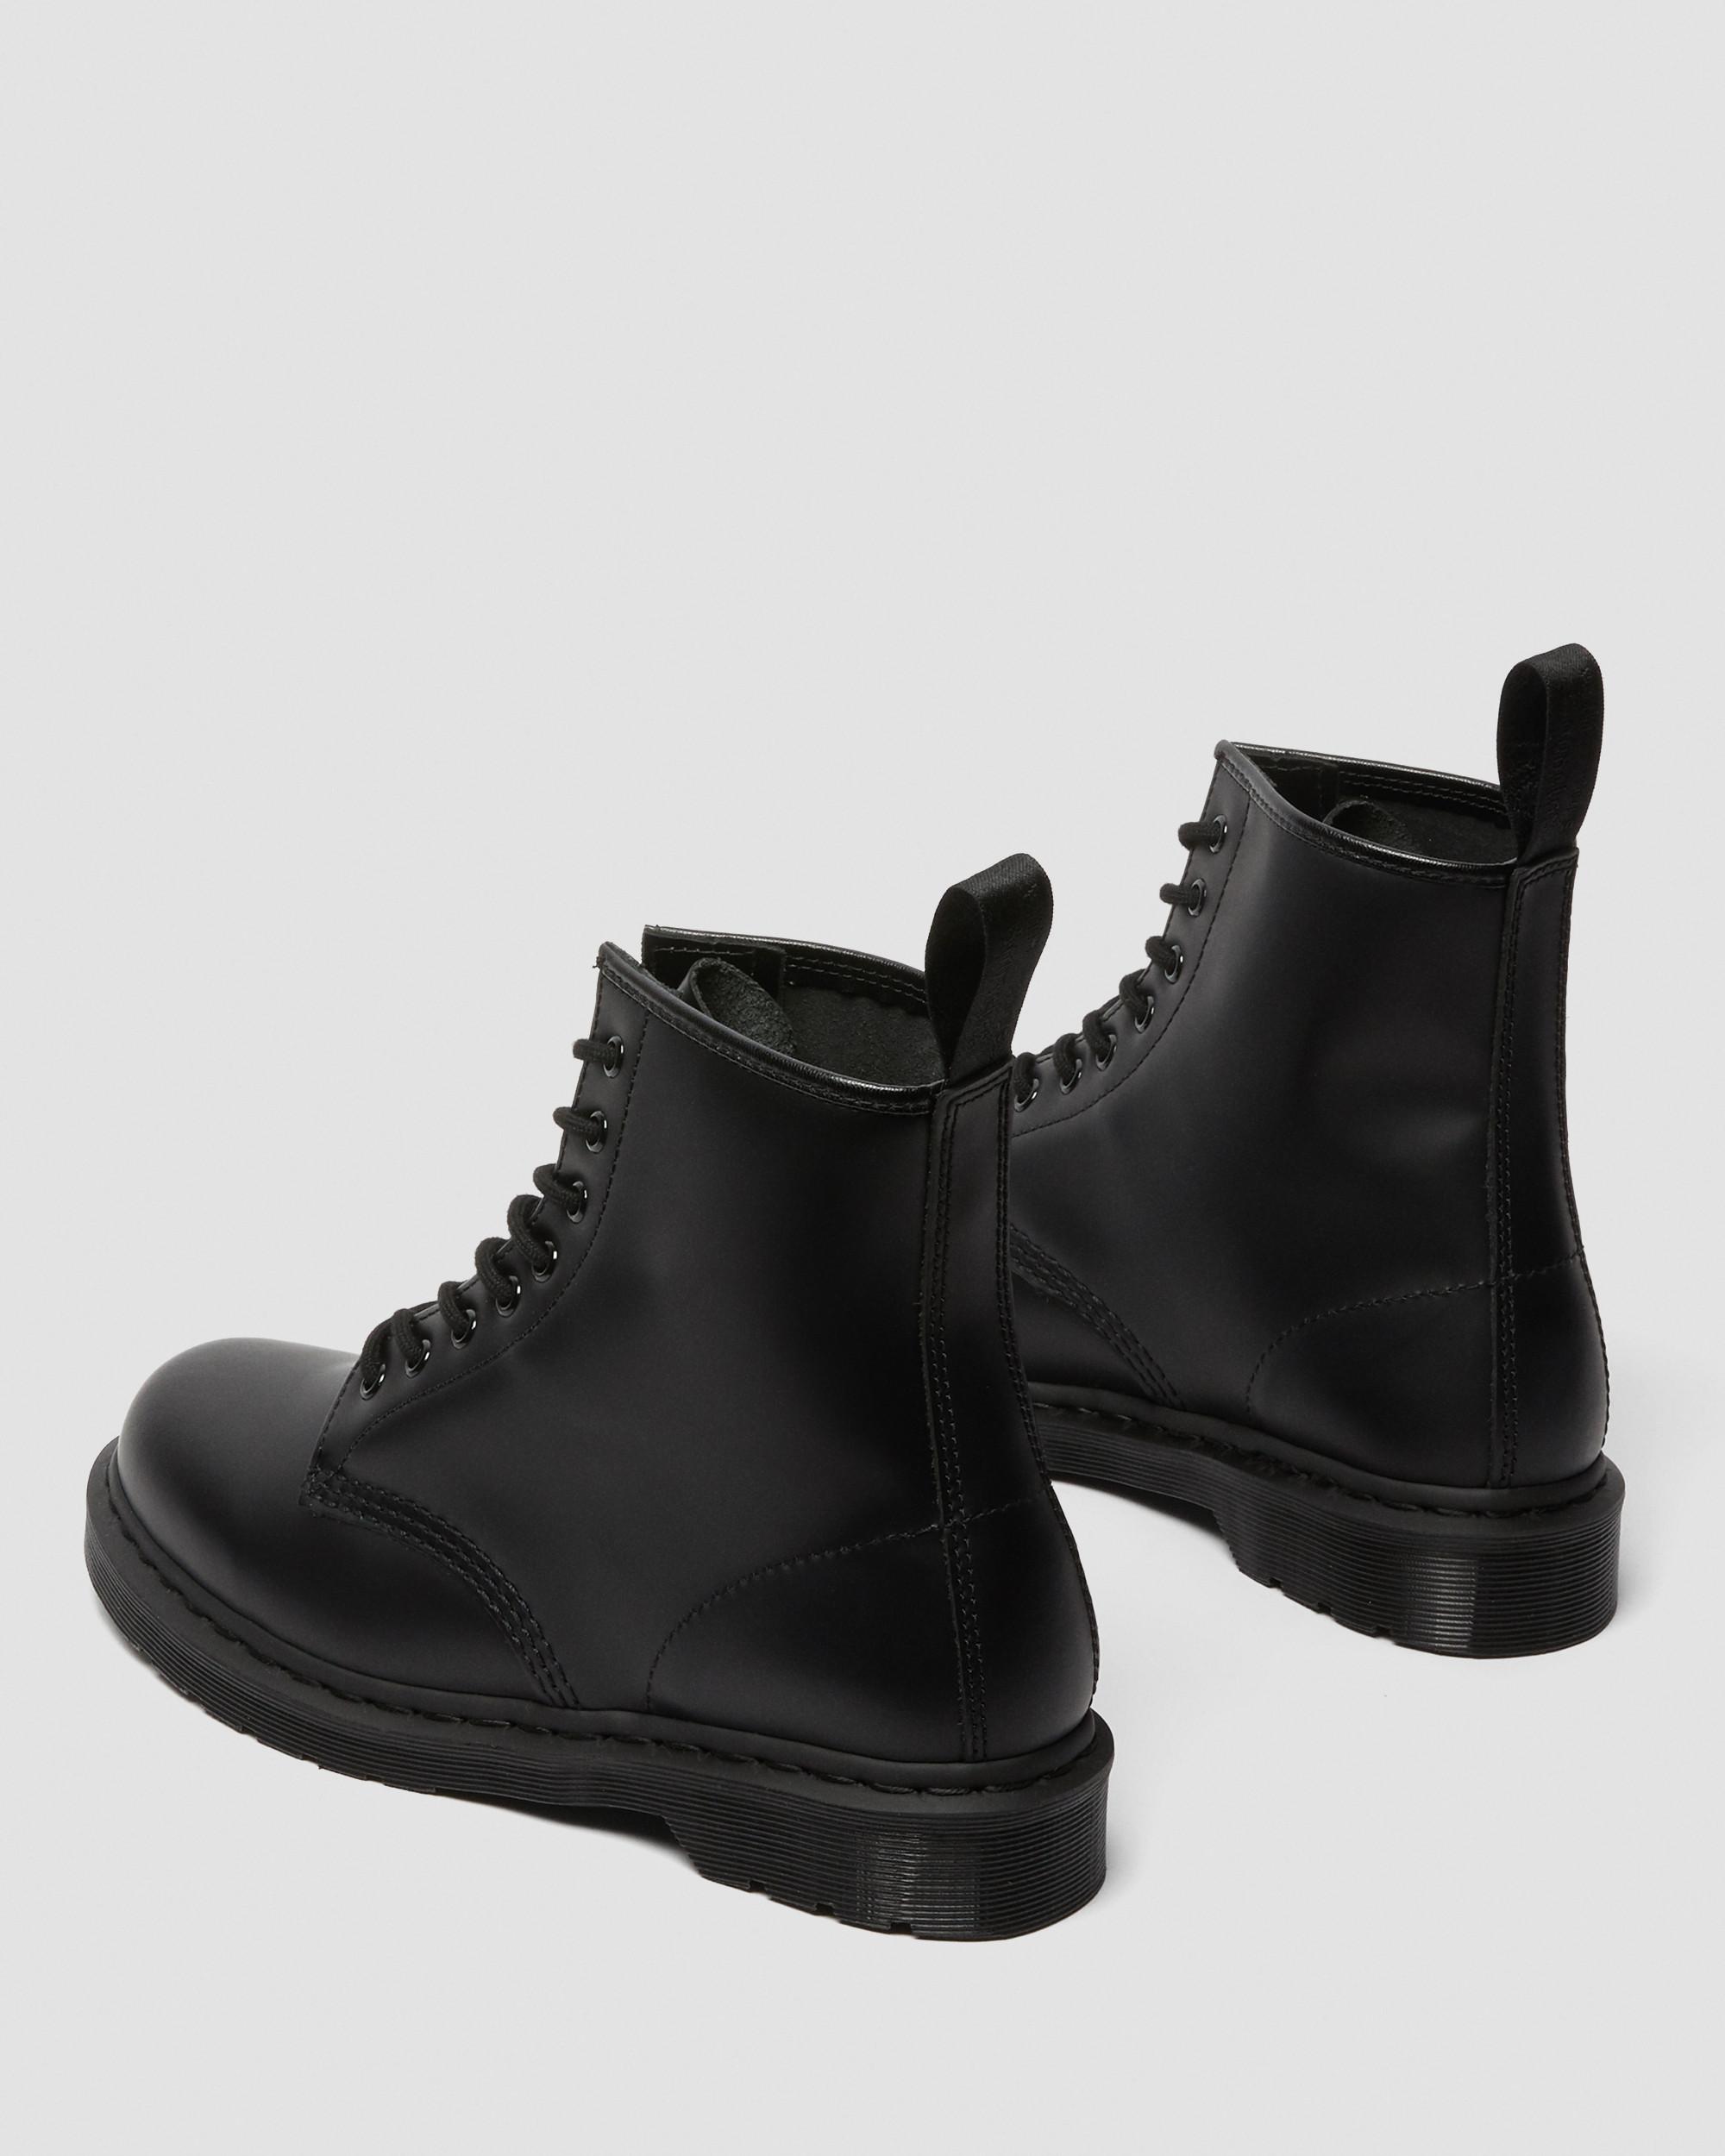 DR MARTENS 1460 Mono Smooth Leather Lace Up Boots